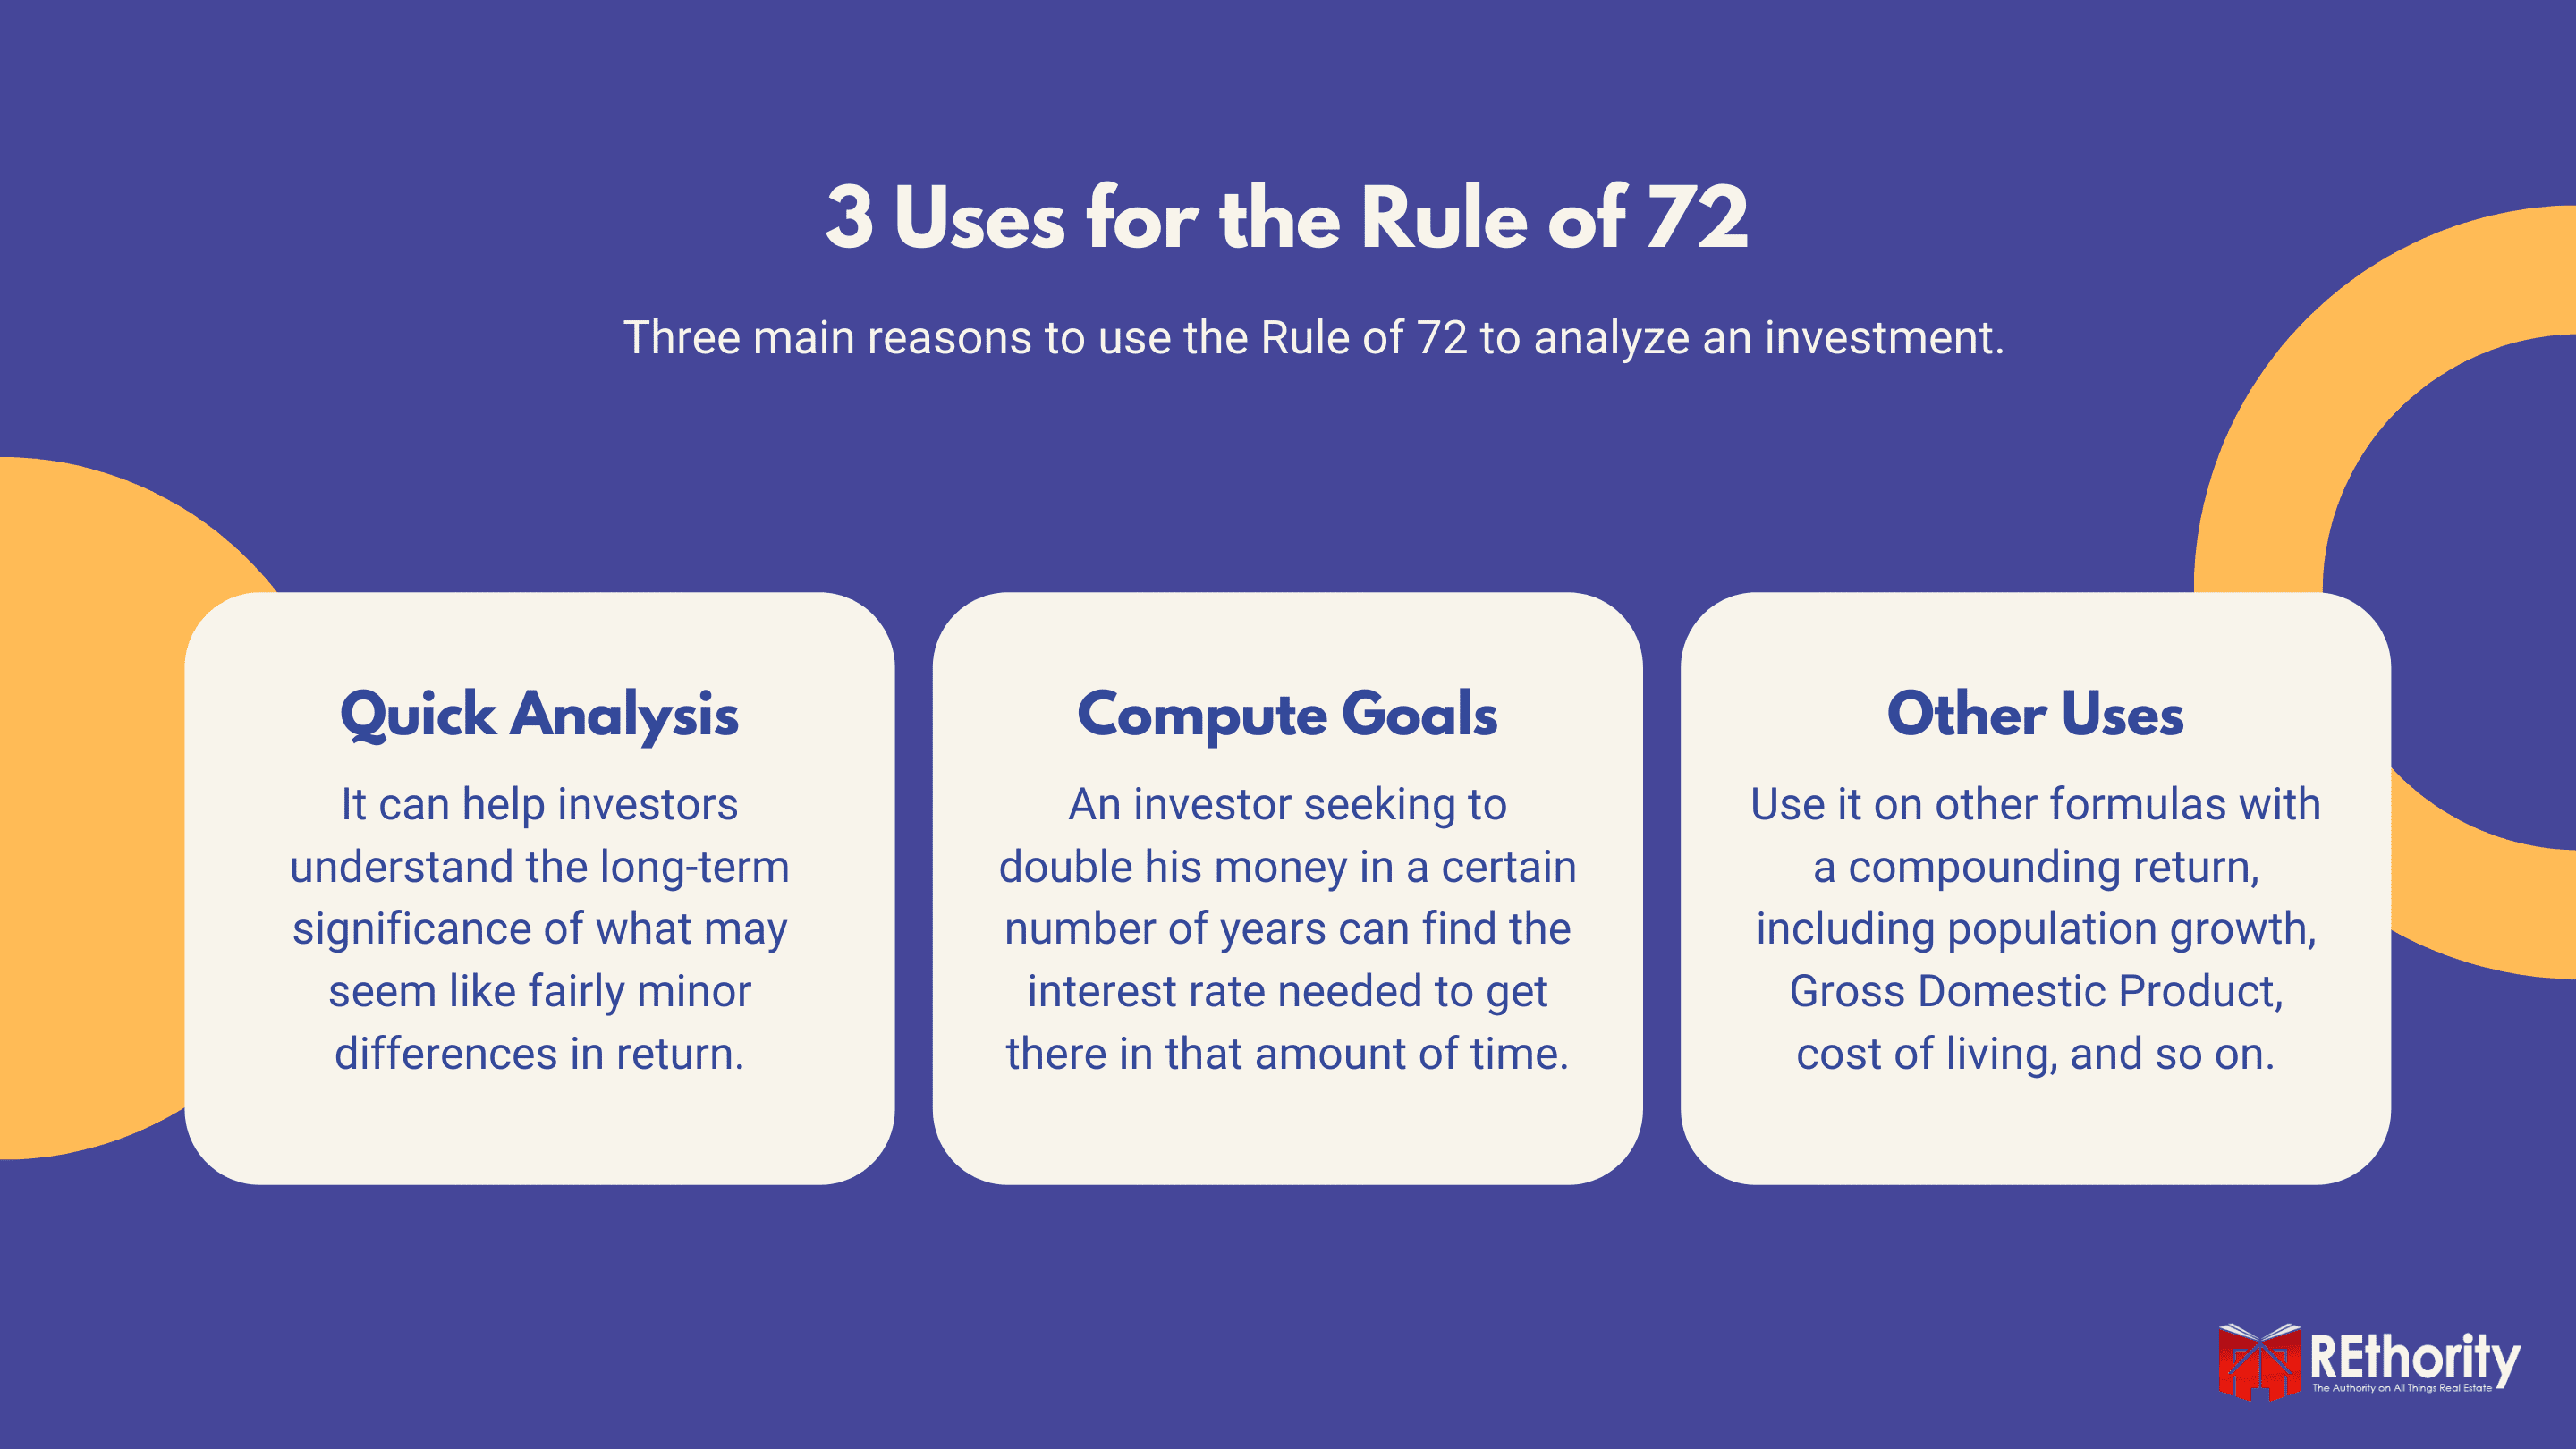 Three main reasons to use the Rule of 72 to analyze an investment.